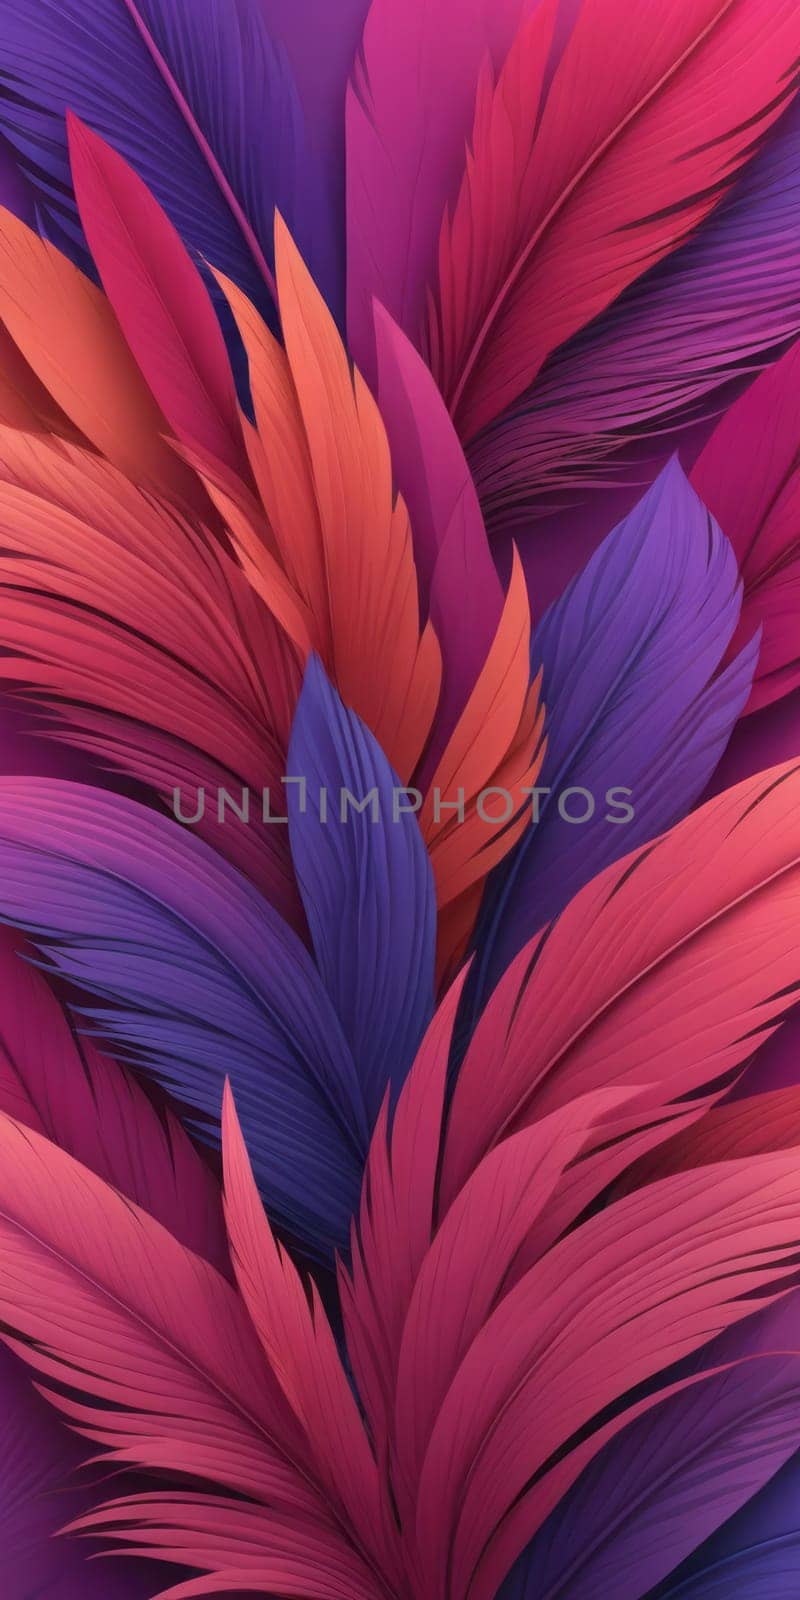 Feathered Shapes in Fuchsia and Red by nkotlyar